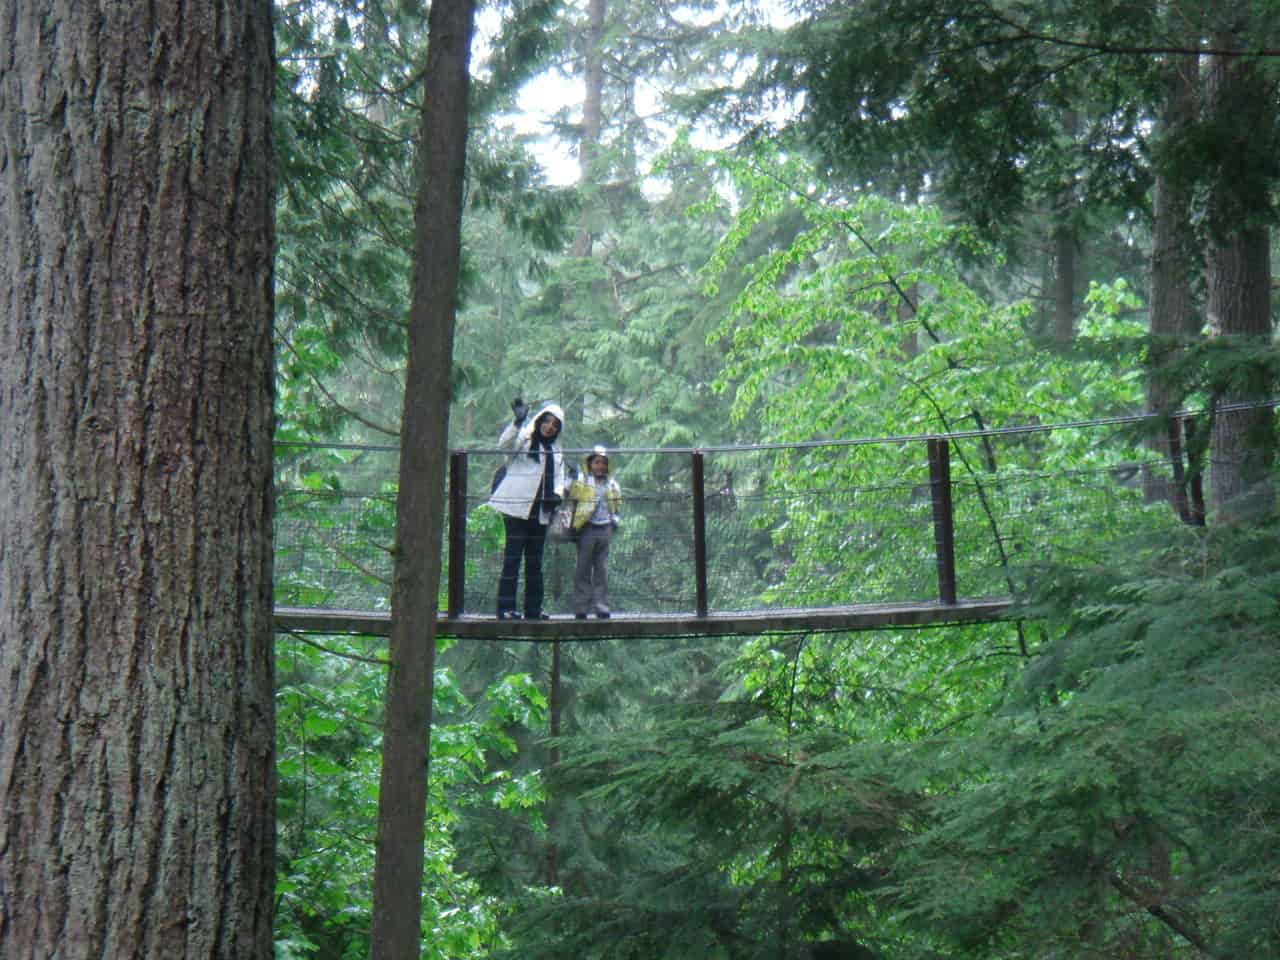 Treeetop trail, Vancouver, Canada